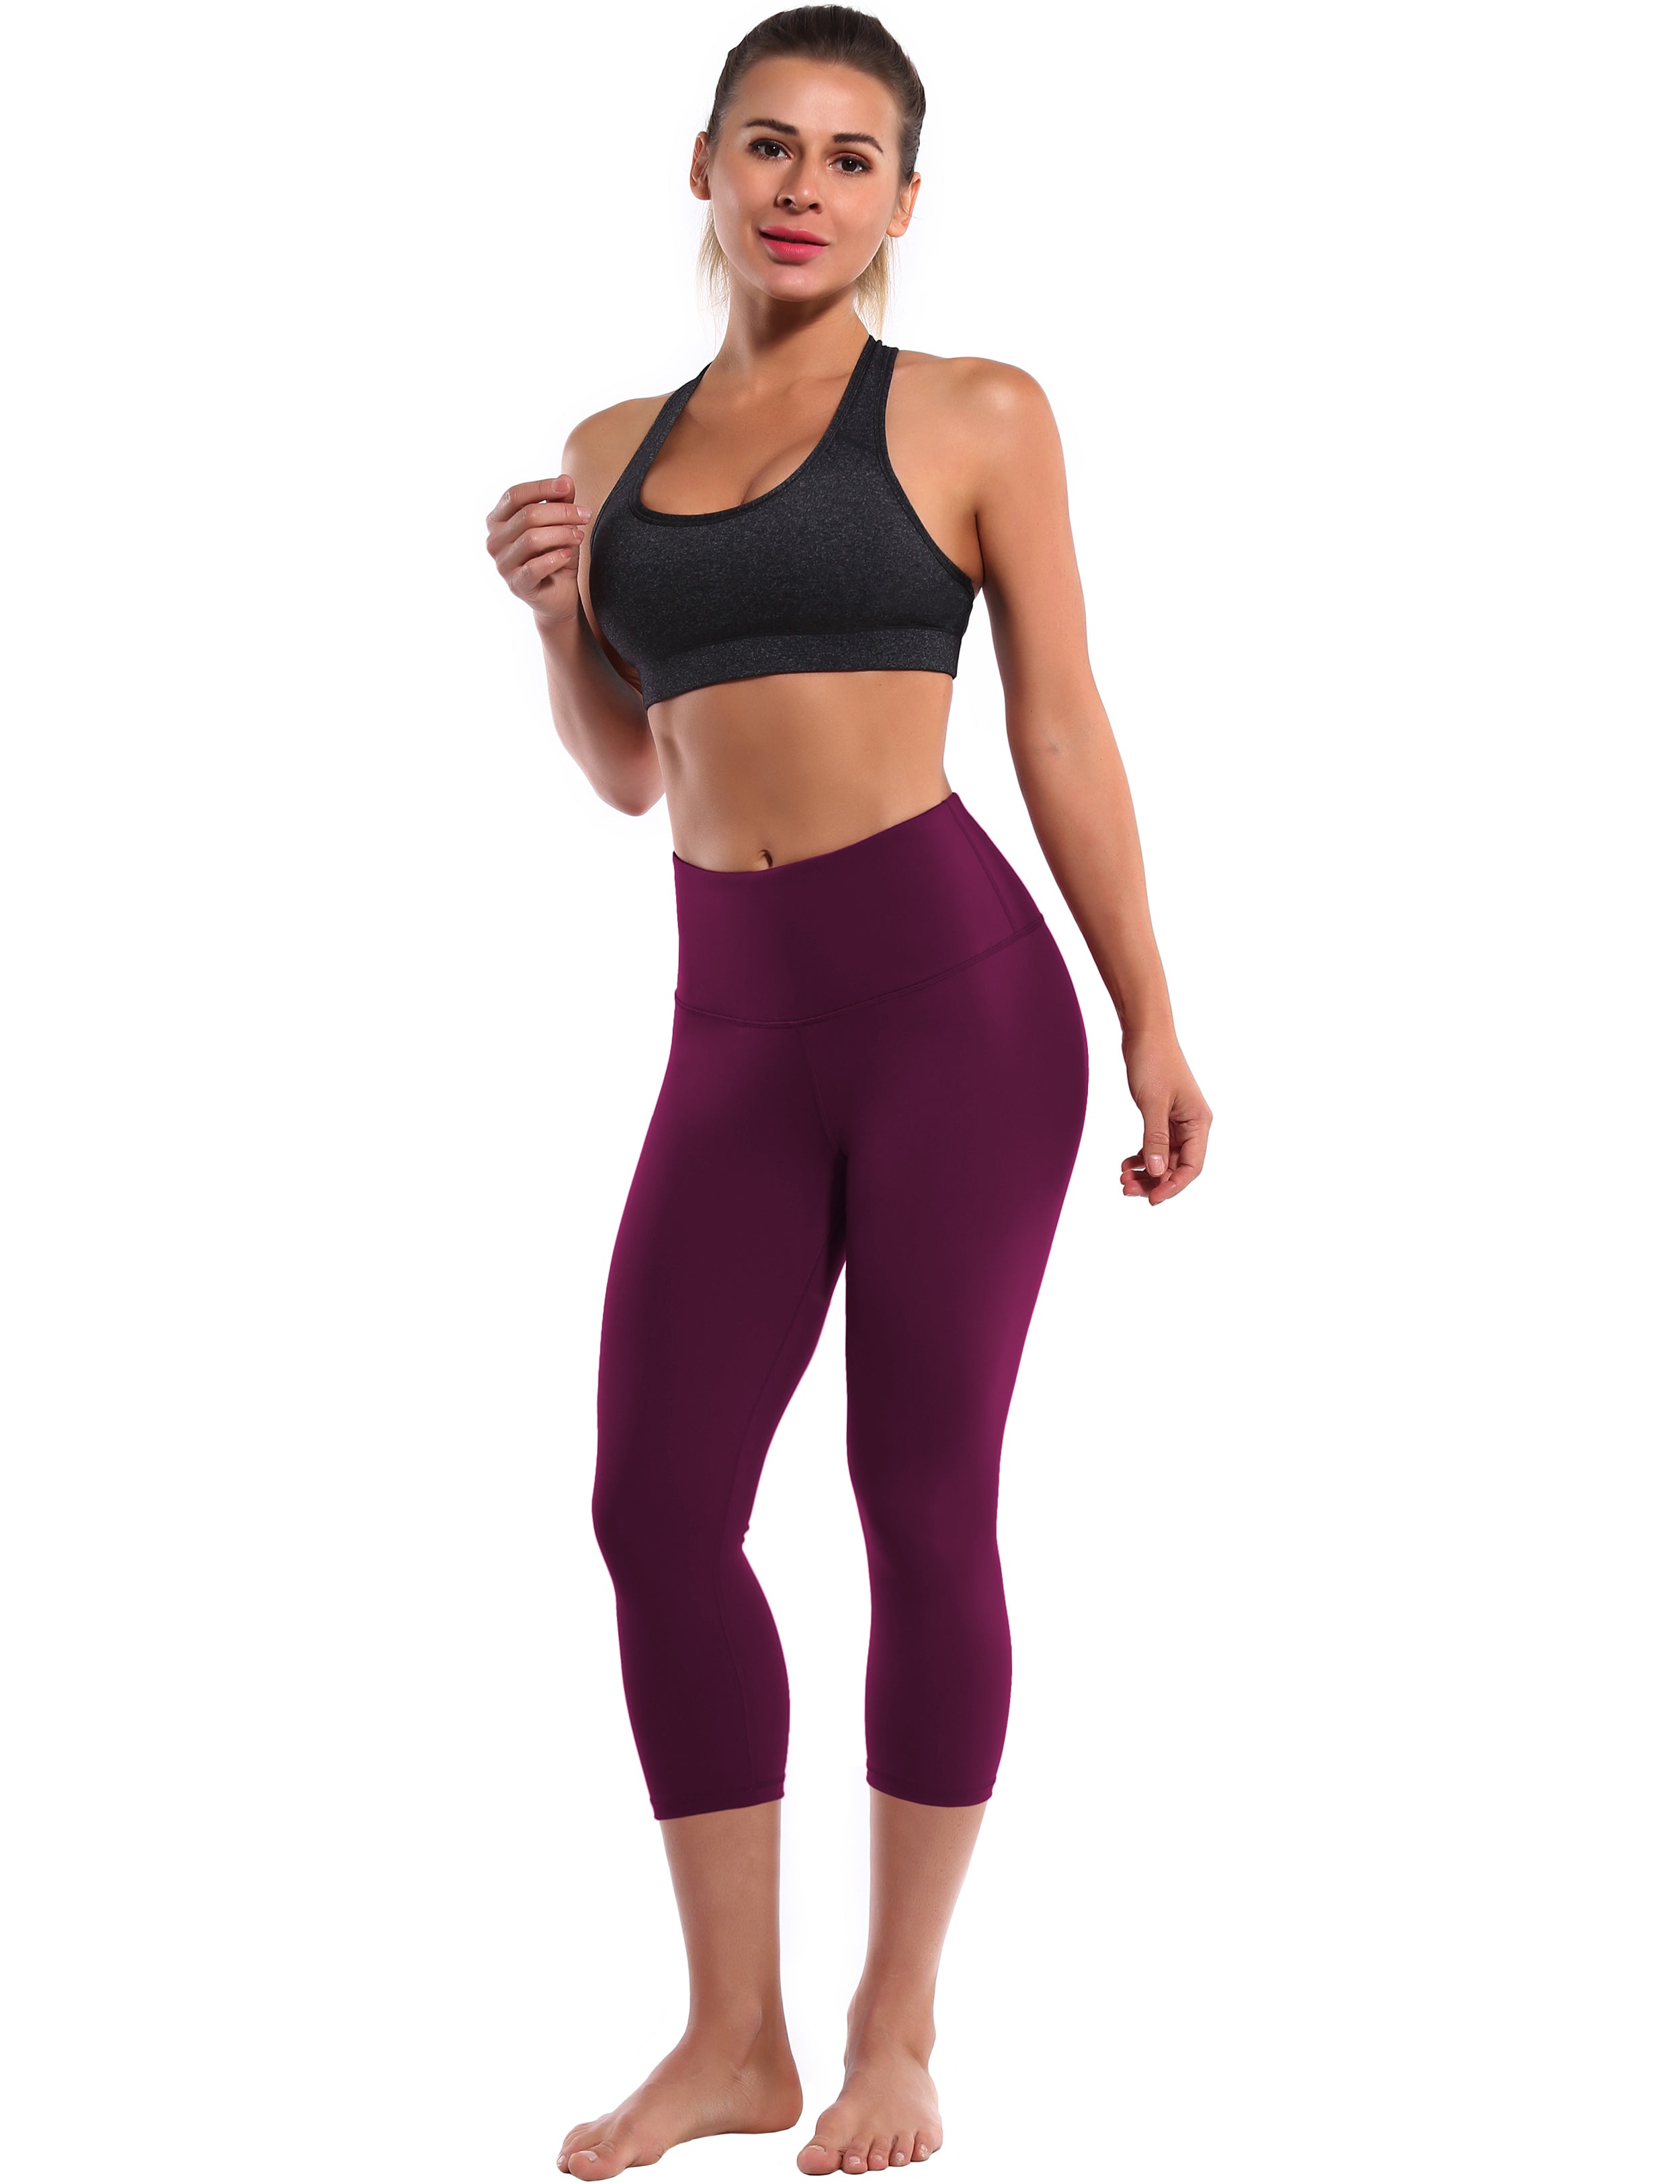 19" High Waist Crop Tight Capris grapevine 75%Nylon/25%Spandex Fabric doesn't attract lint easily 4-way stretch No see-through Moisture-wicking Tummy control Inner pocket